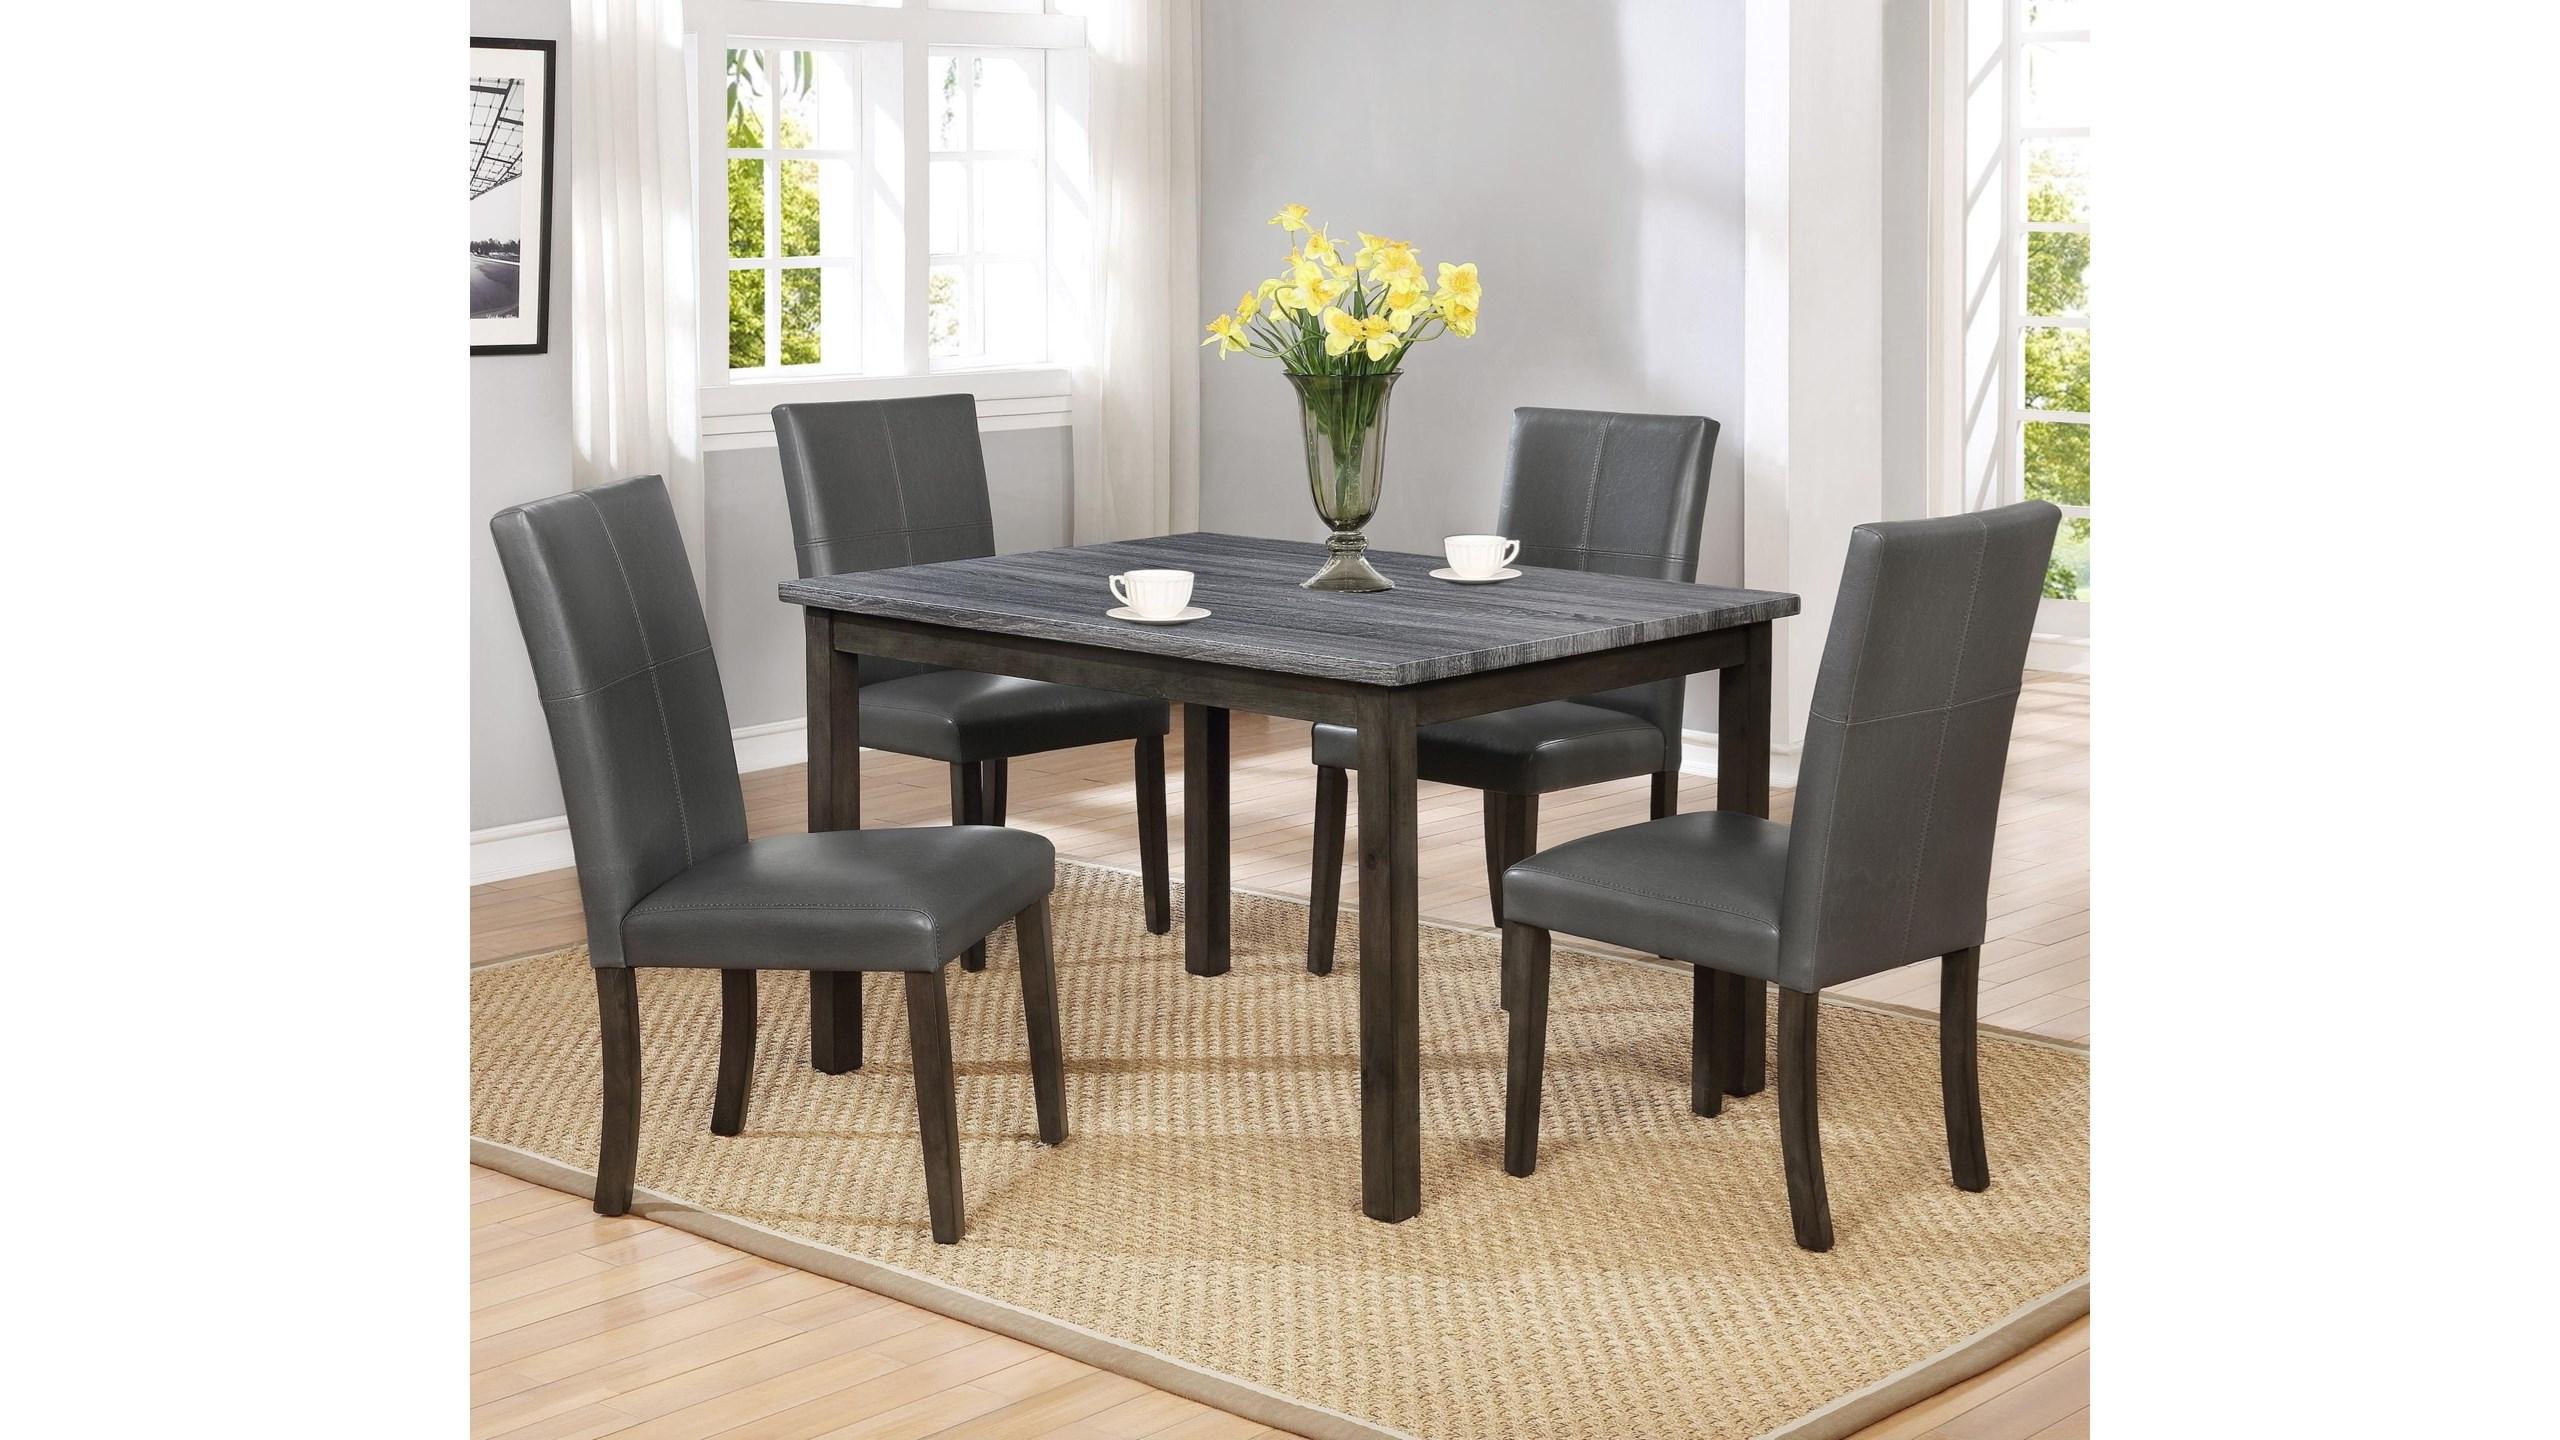 Modern, Simple Dining Room Set Pompei 2377GY-T-3648-5pcs in Dark Gray, Brown PU